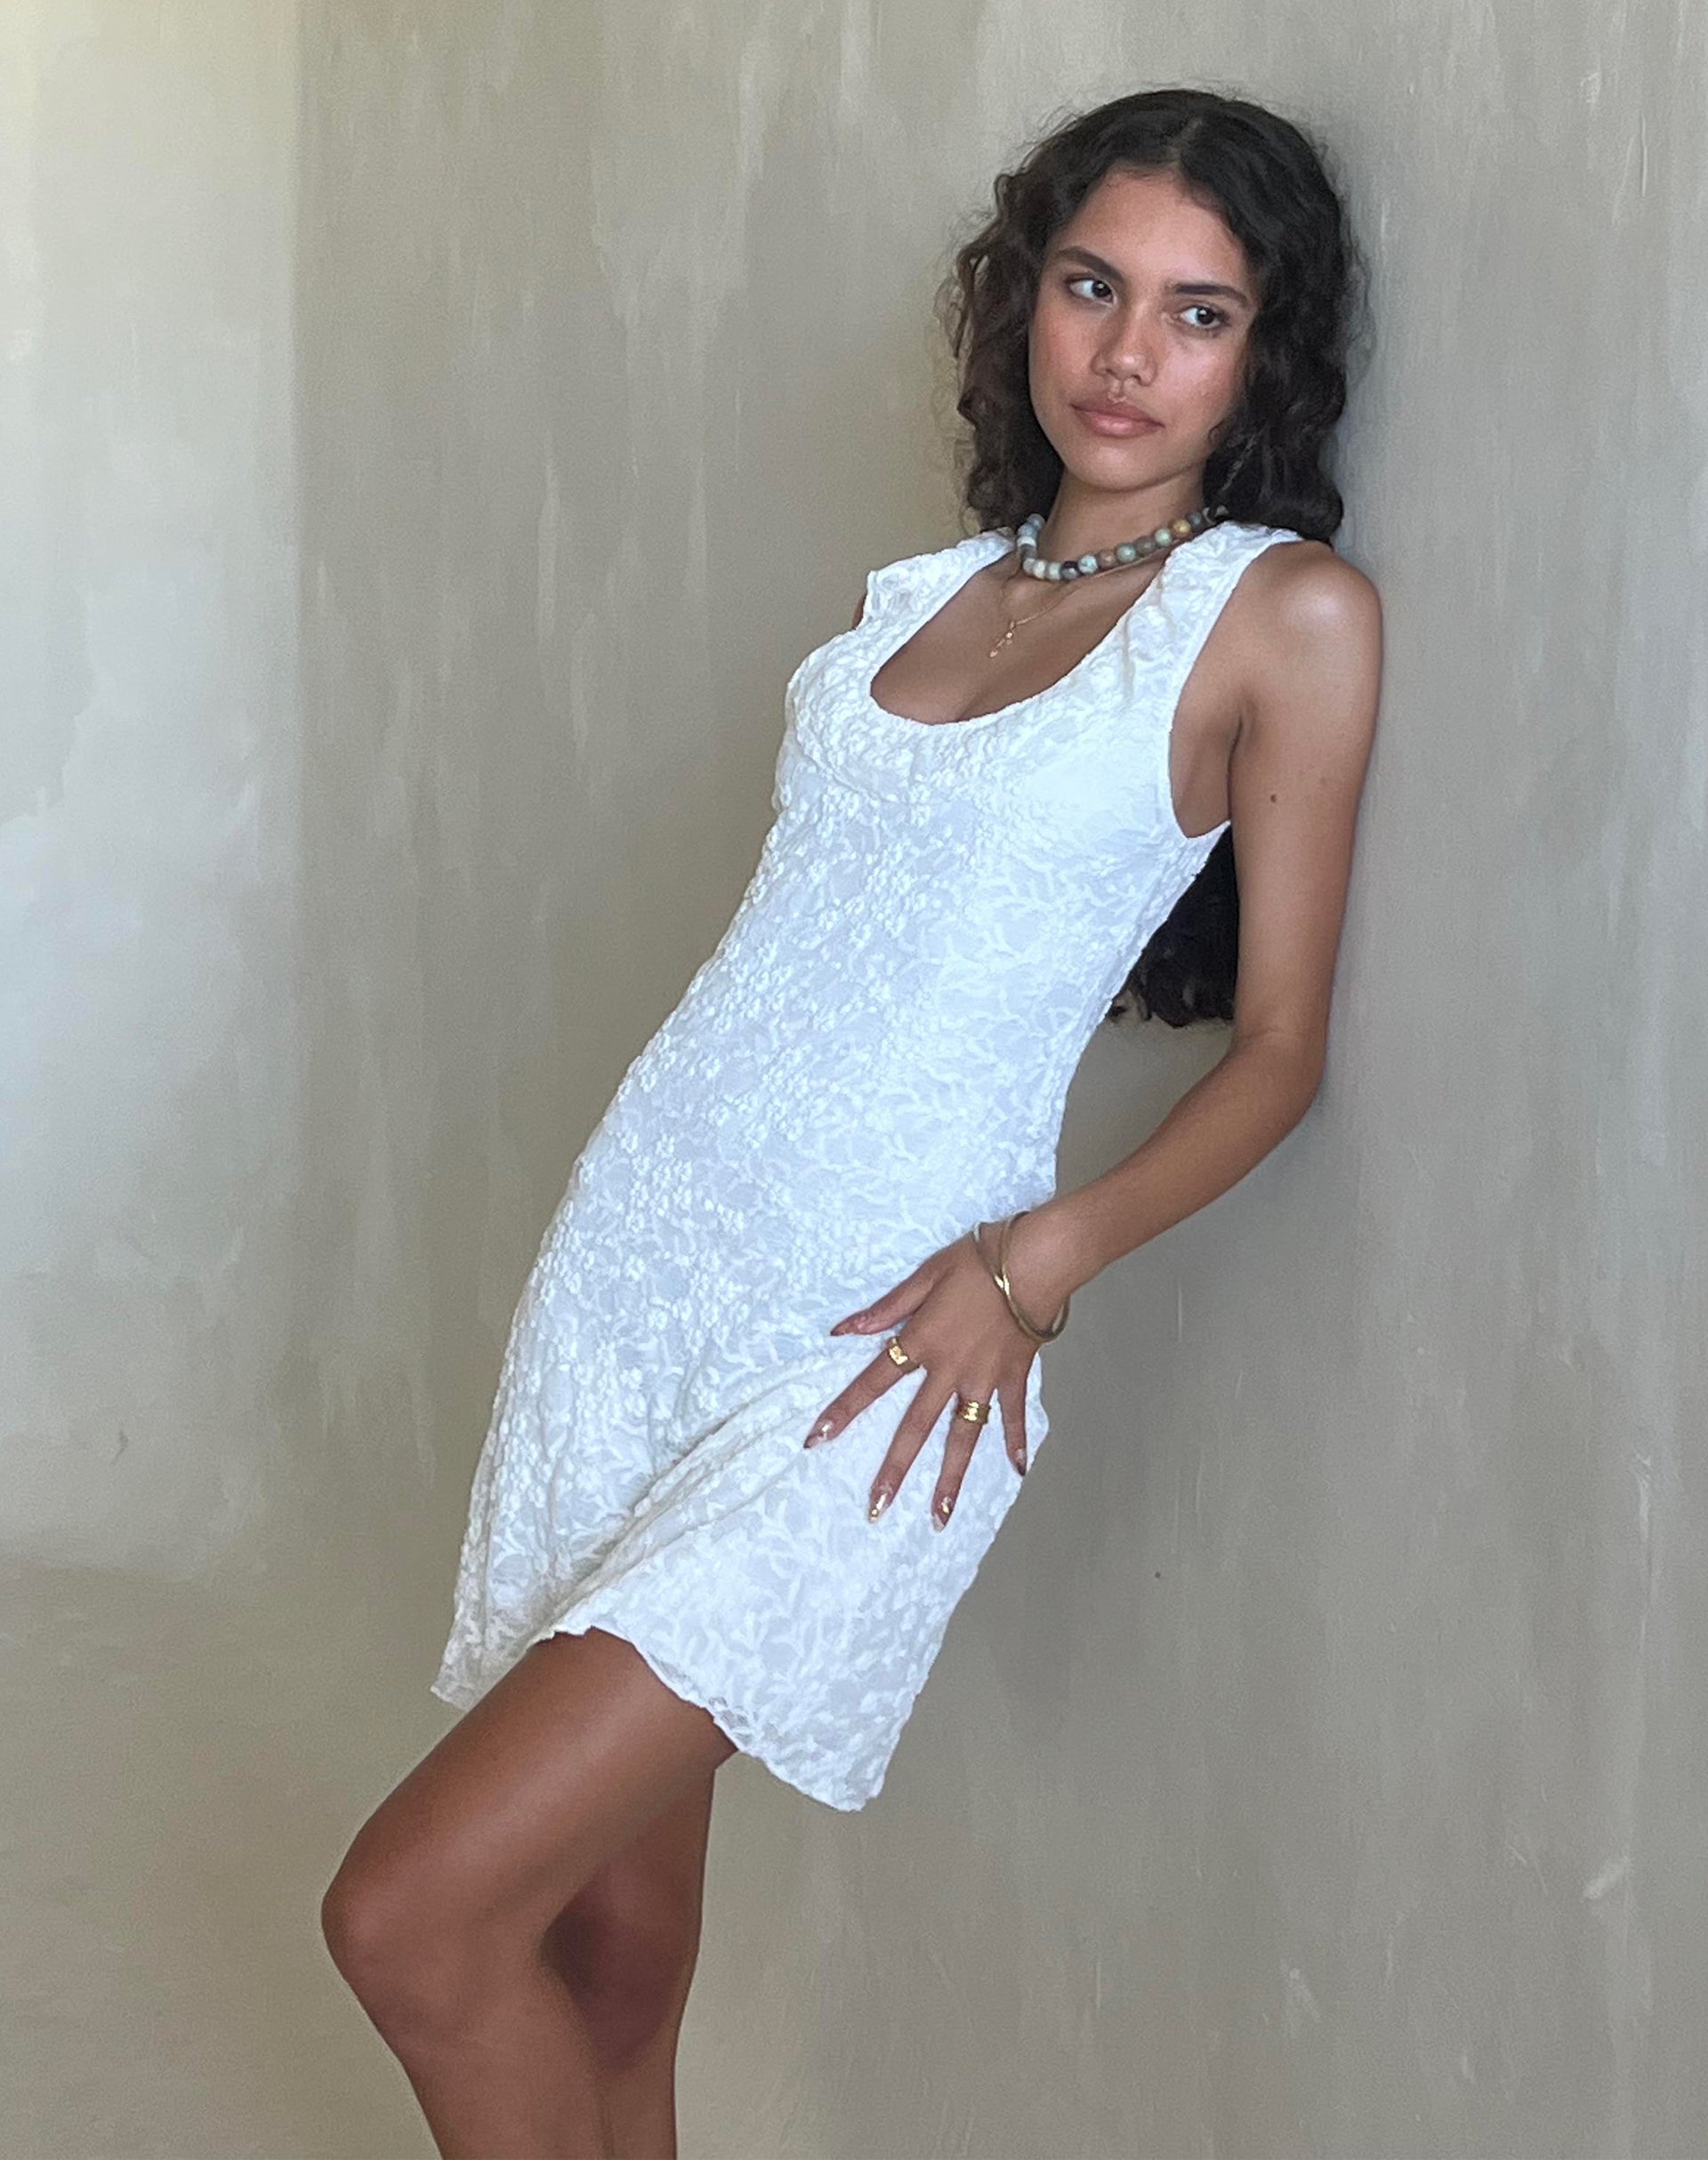 image of Eltami Mini Dress in Lace Ivory